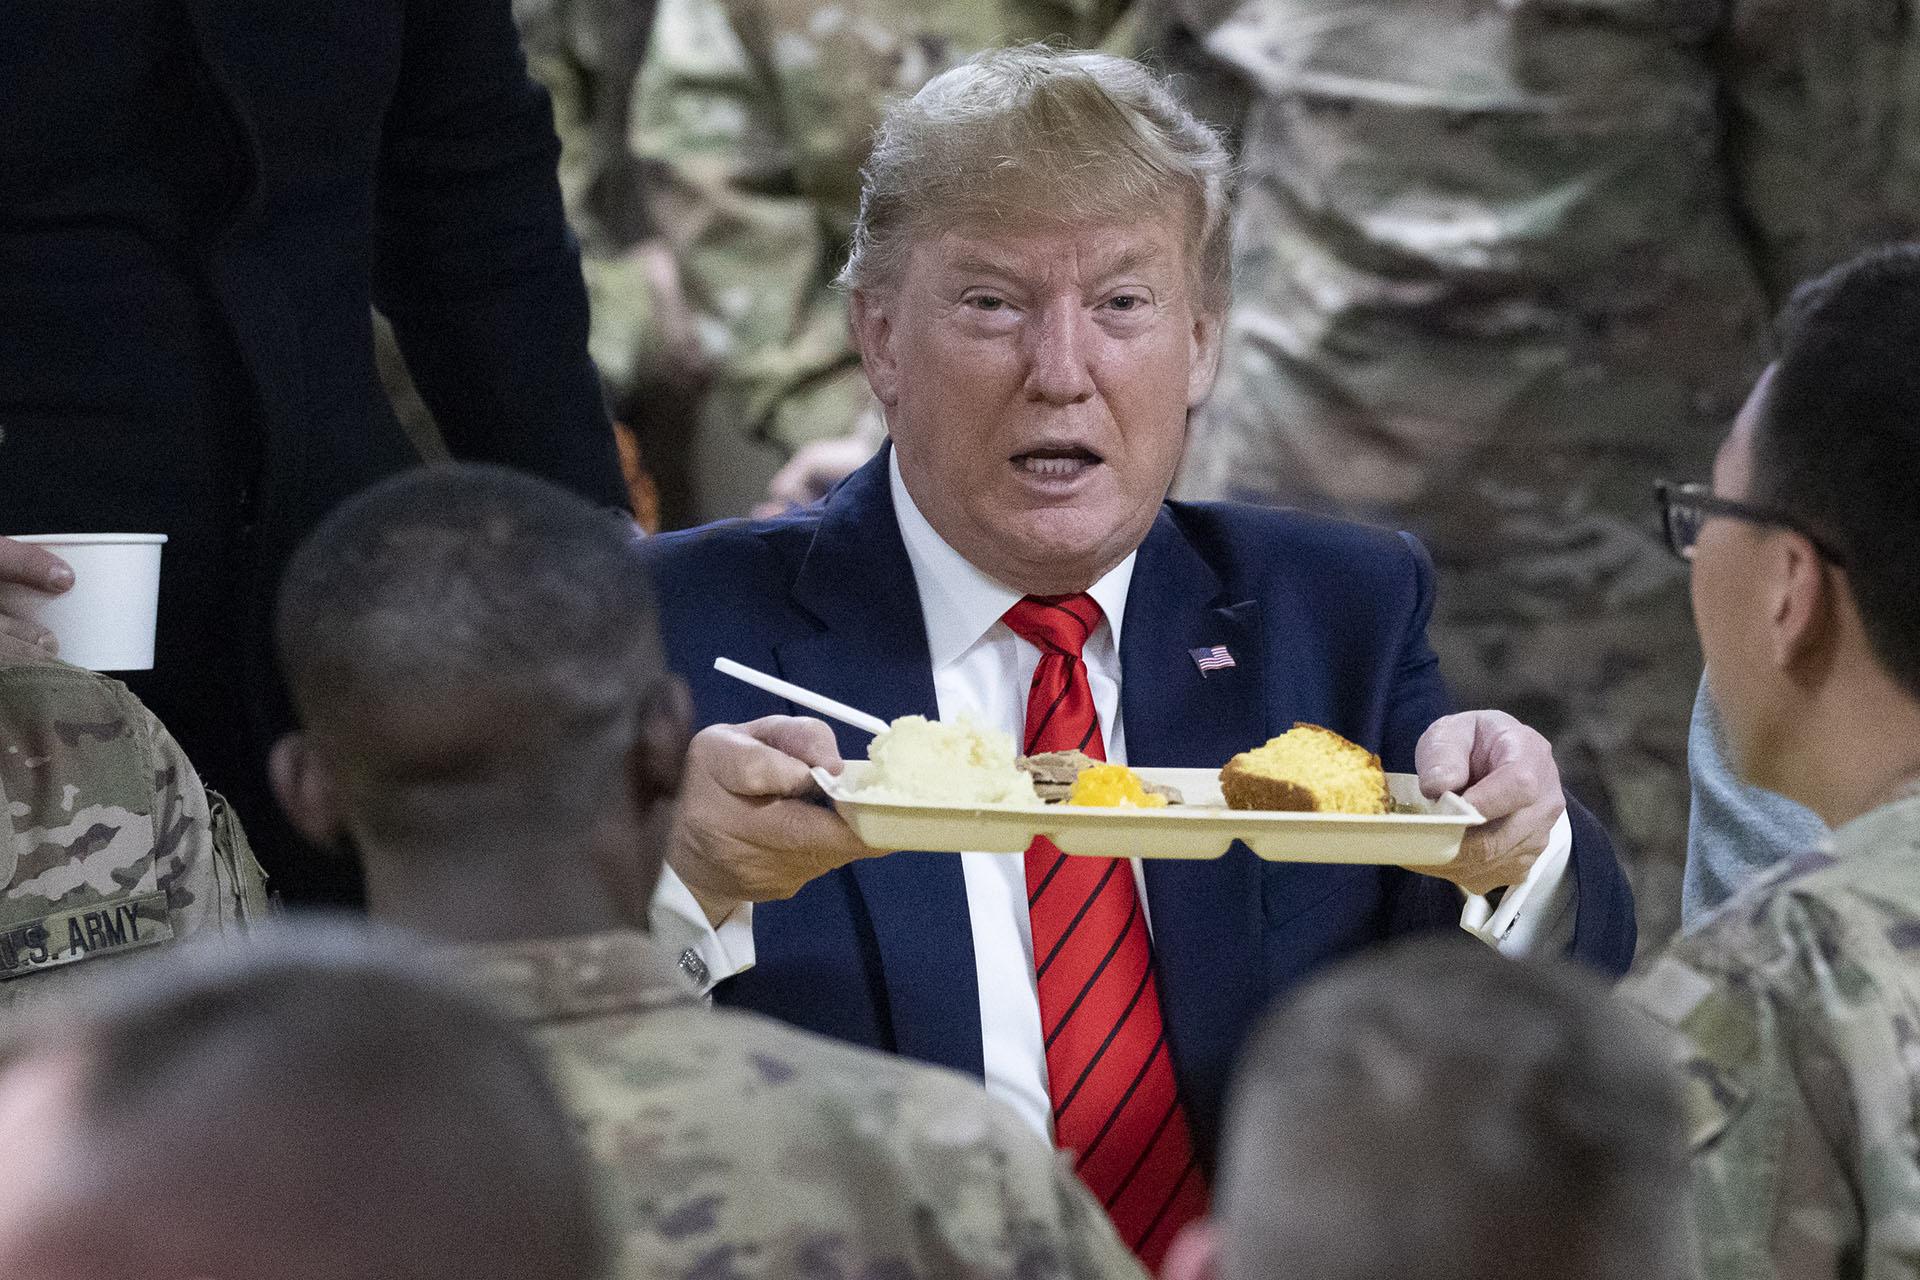 President Donald Trump holds up a tray of Thanksgiving dinner during a surprise Thanksgiving Day visit to the troops, Thursday, Nov. 28, 2019, at Bagram Air Field, Afghanistan. (AP Photo / Alex Brandon)